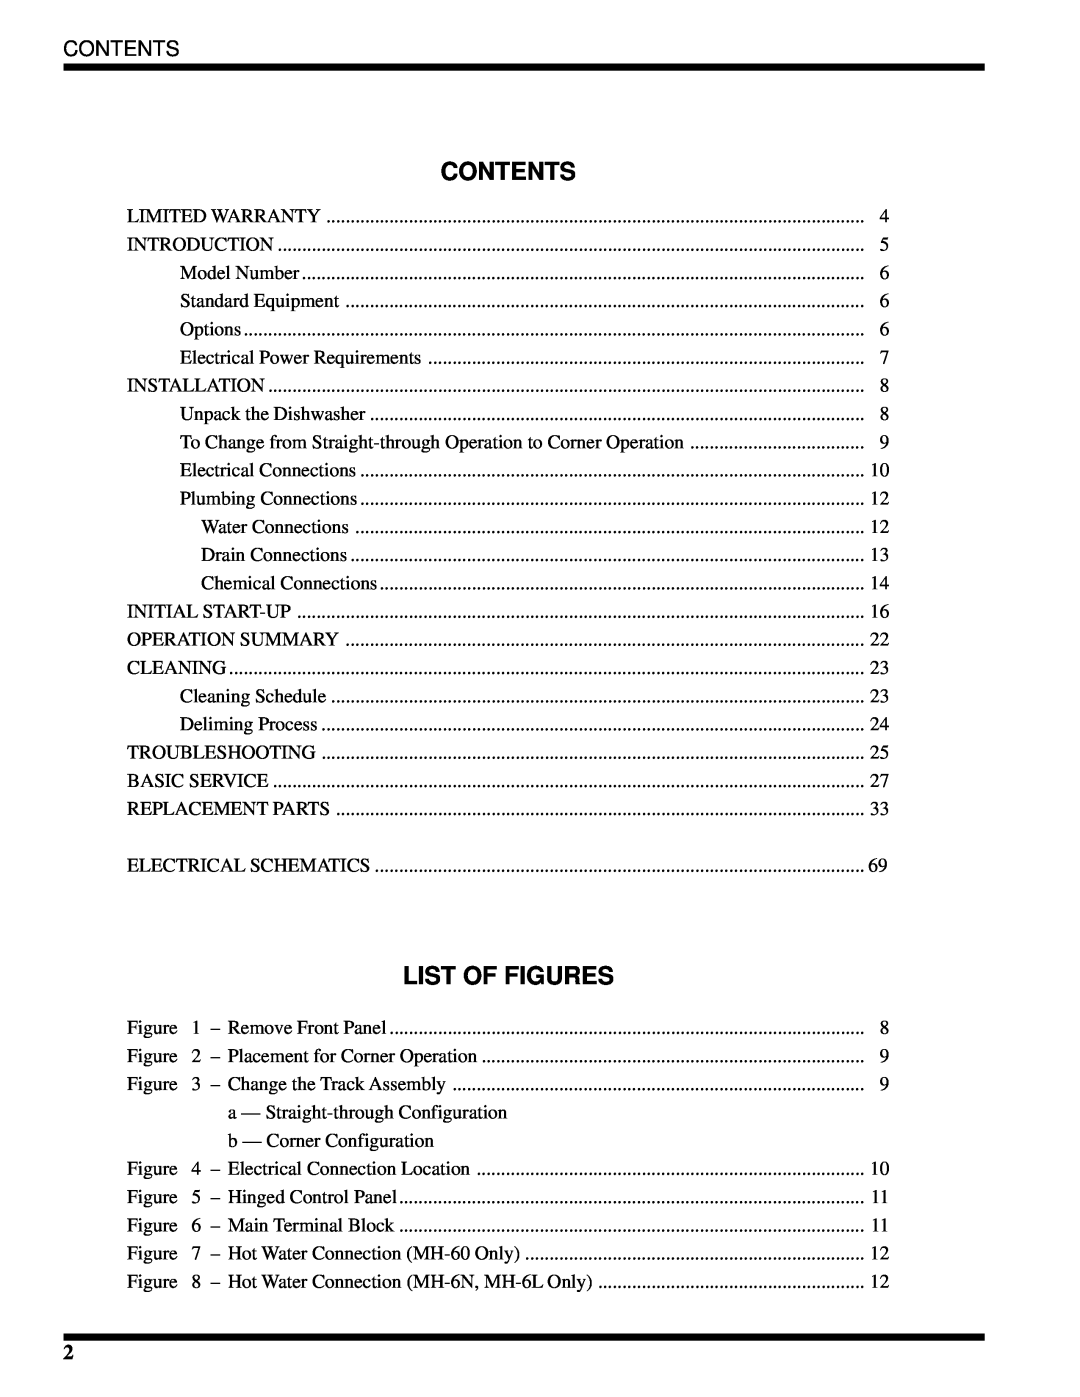 Moyer Diebel MH-6LM3, MH-6NM3, MH-60M3 technical manual Contents, List Of Figures 